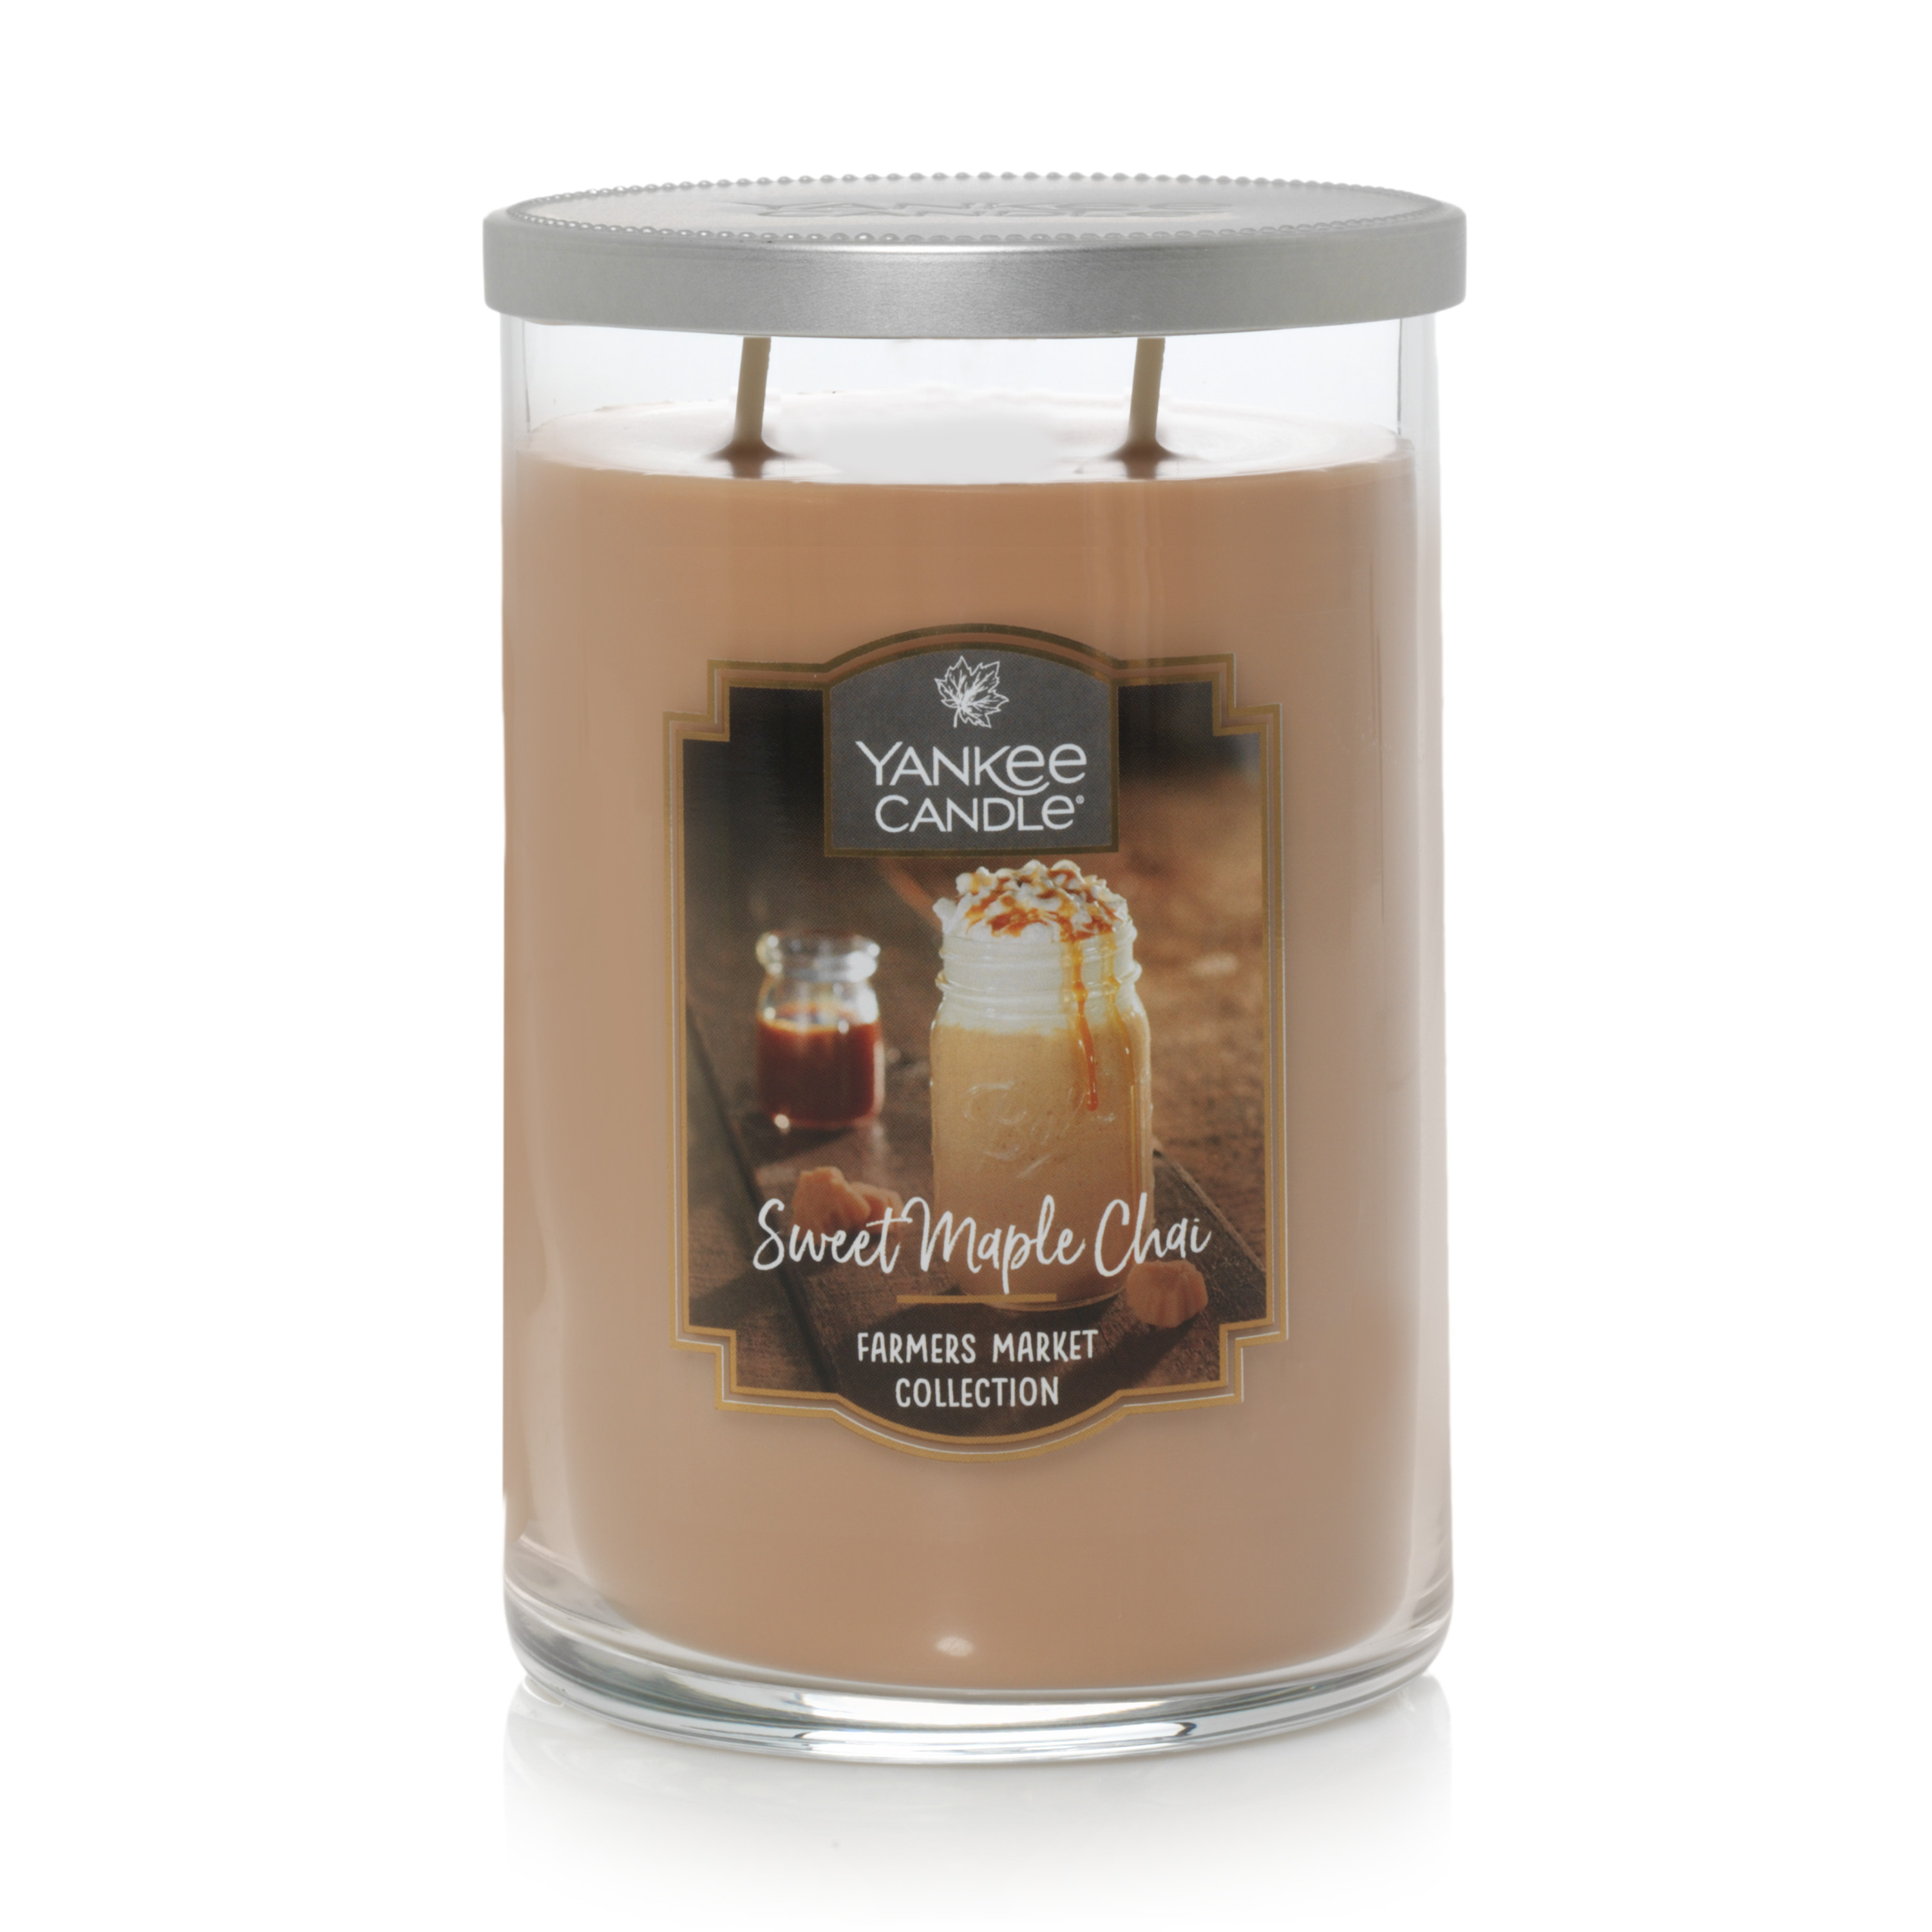 Yankee Candle® Large 2-Wick Tumbler Candle, Sweet Maple Chai - image 1 of 3